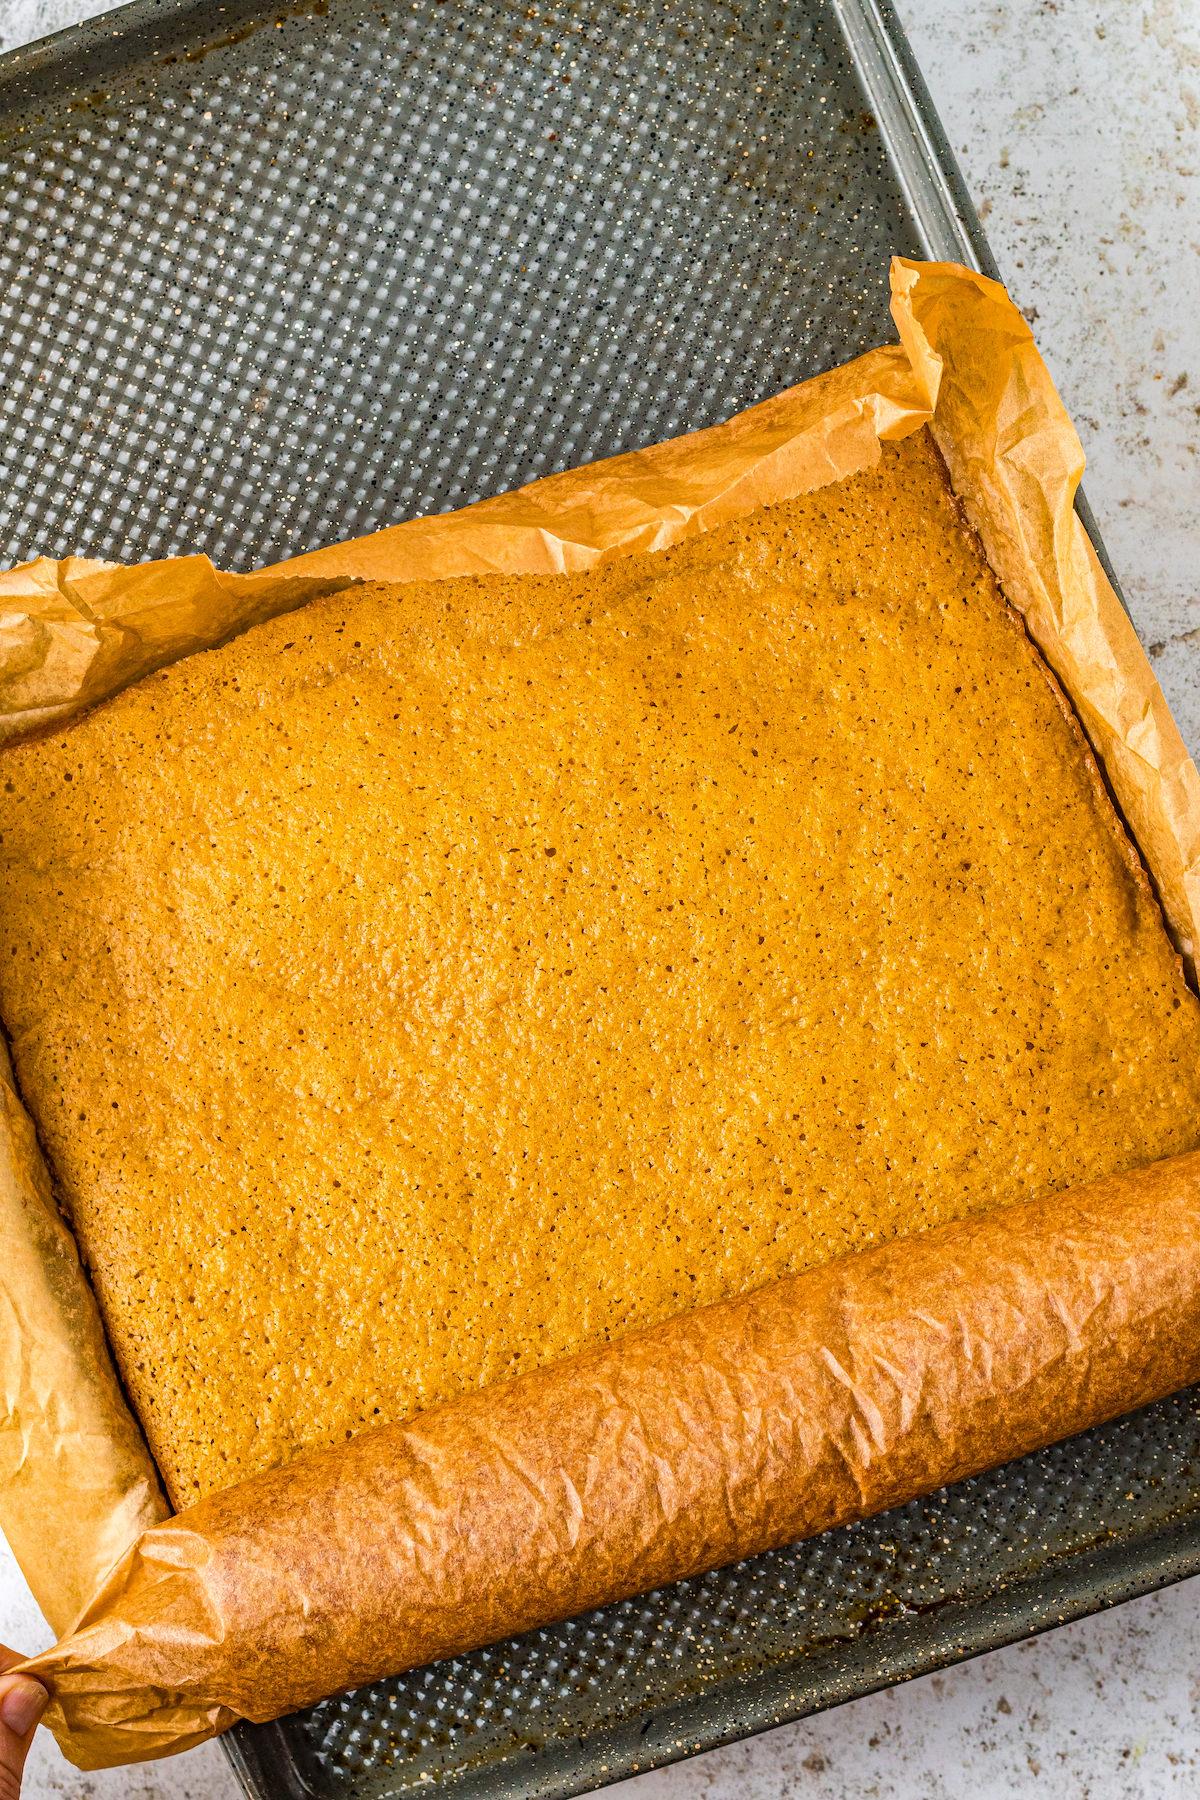 A pumpkin jelly roll cake being rolled up in its parchment lining.